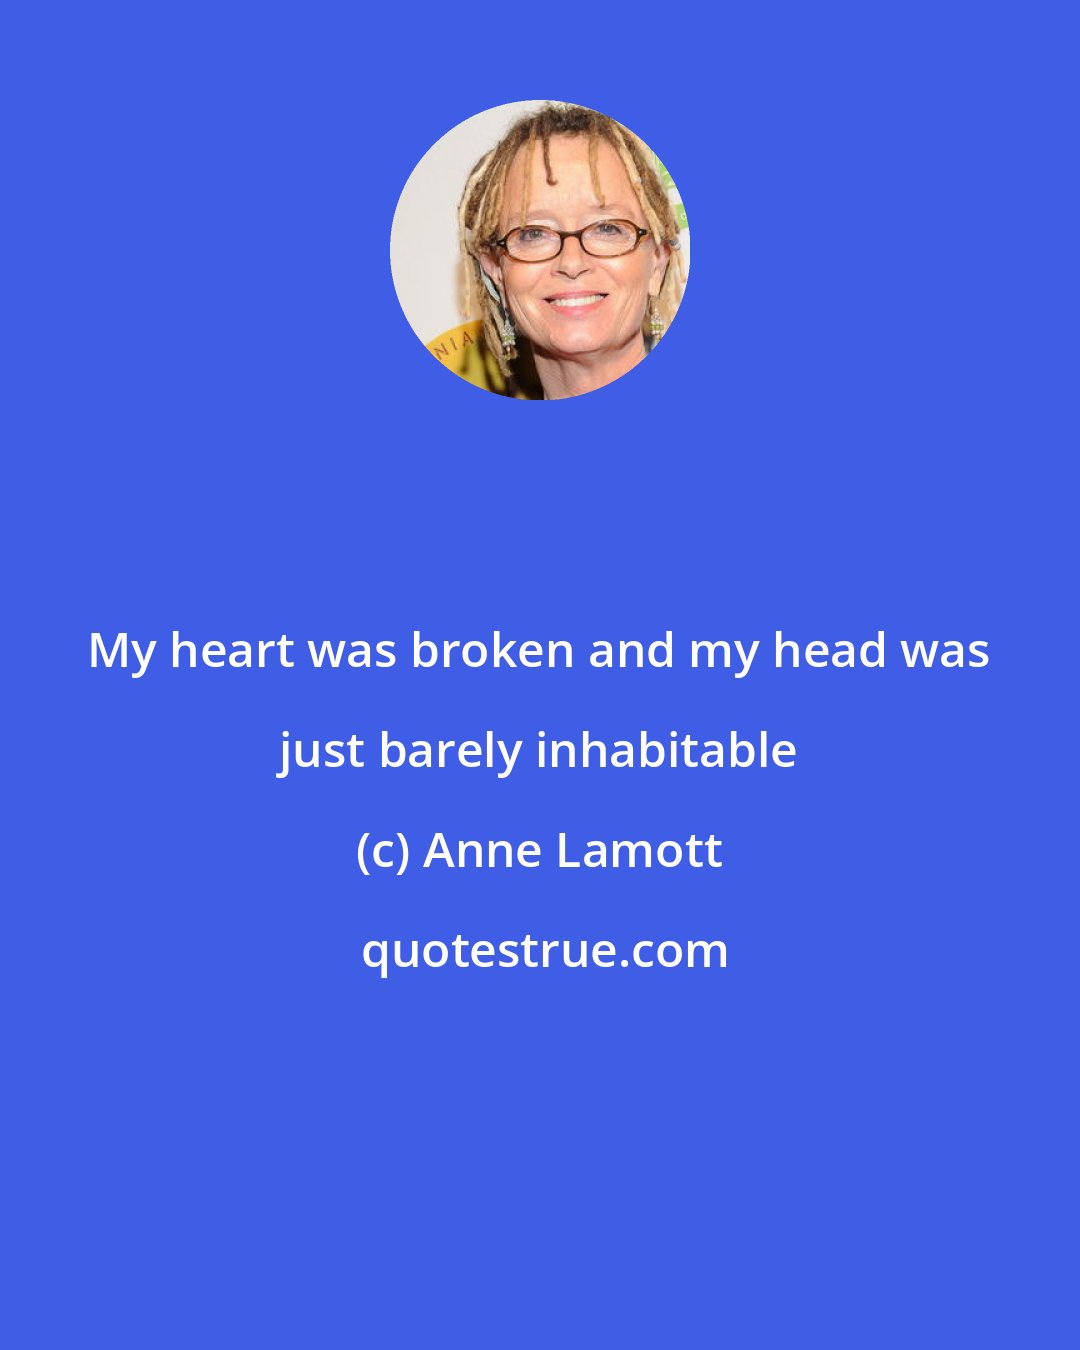 Anne Lamott: My heart was broken and my head was just barely inhabitable